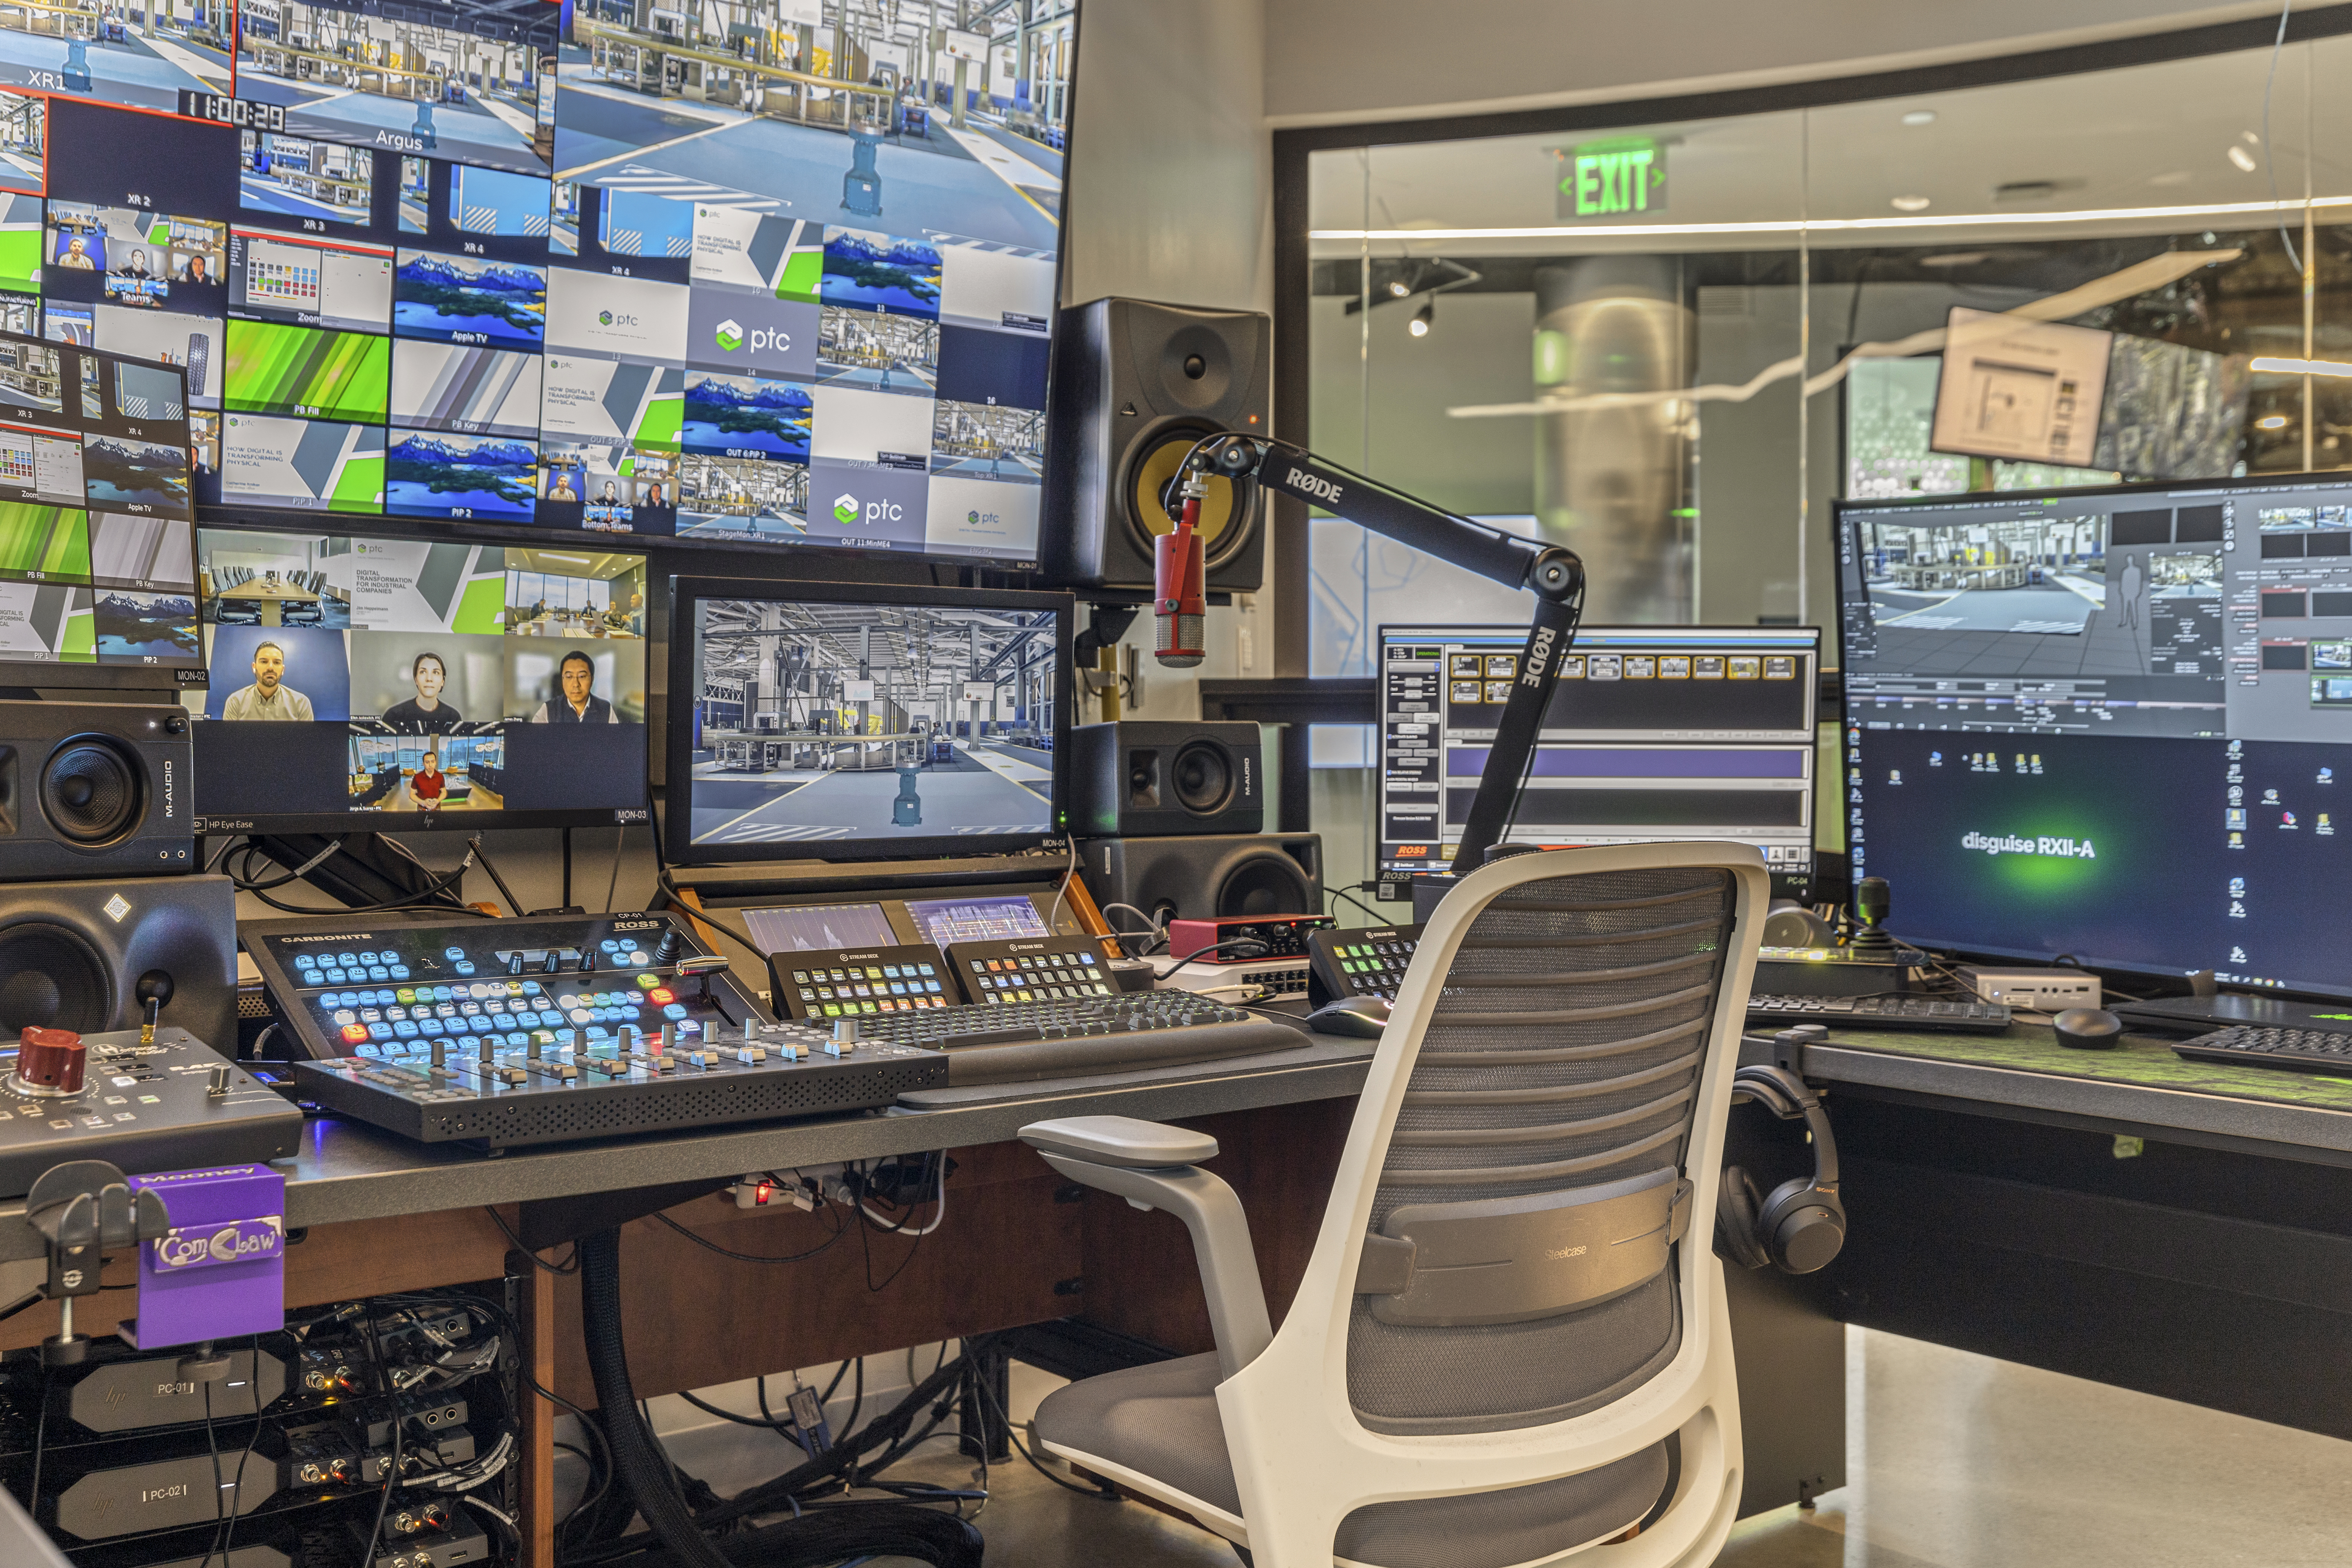 The control room for the xR stage